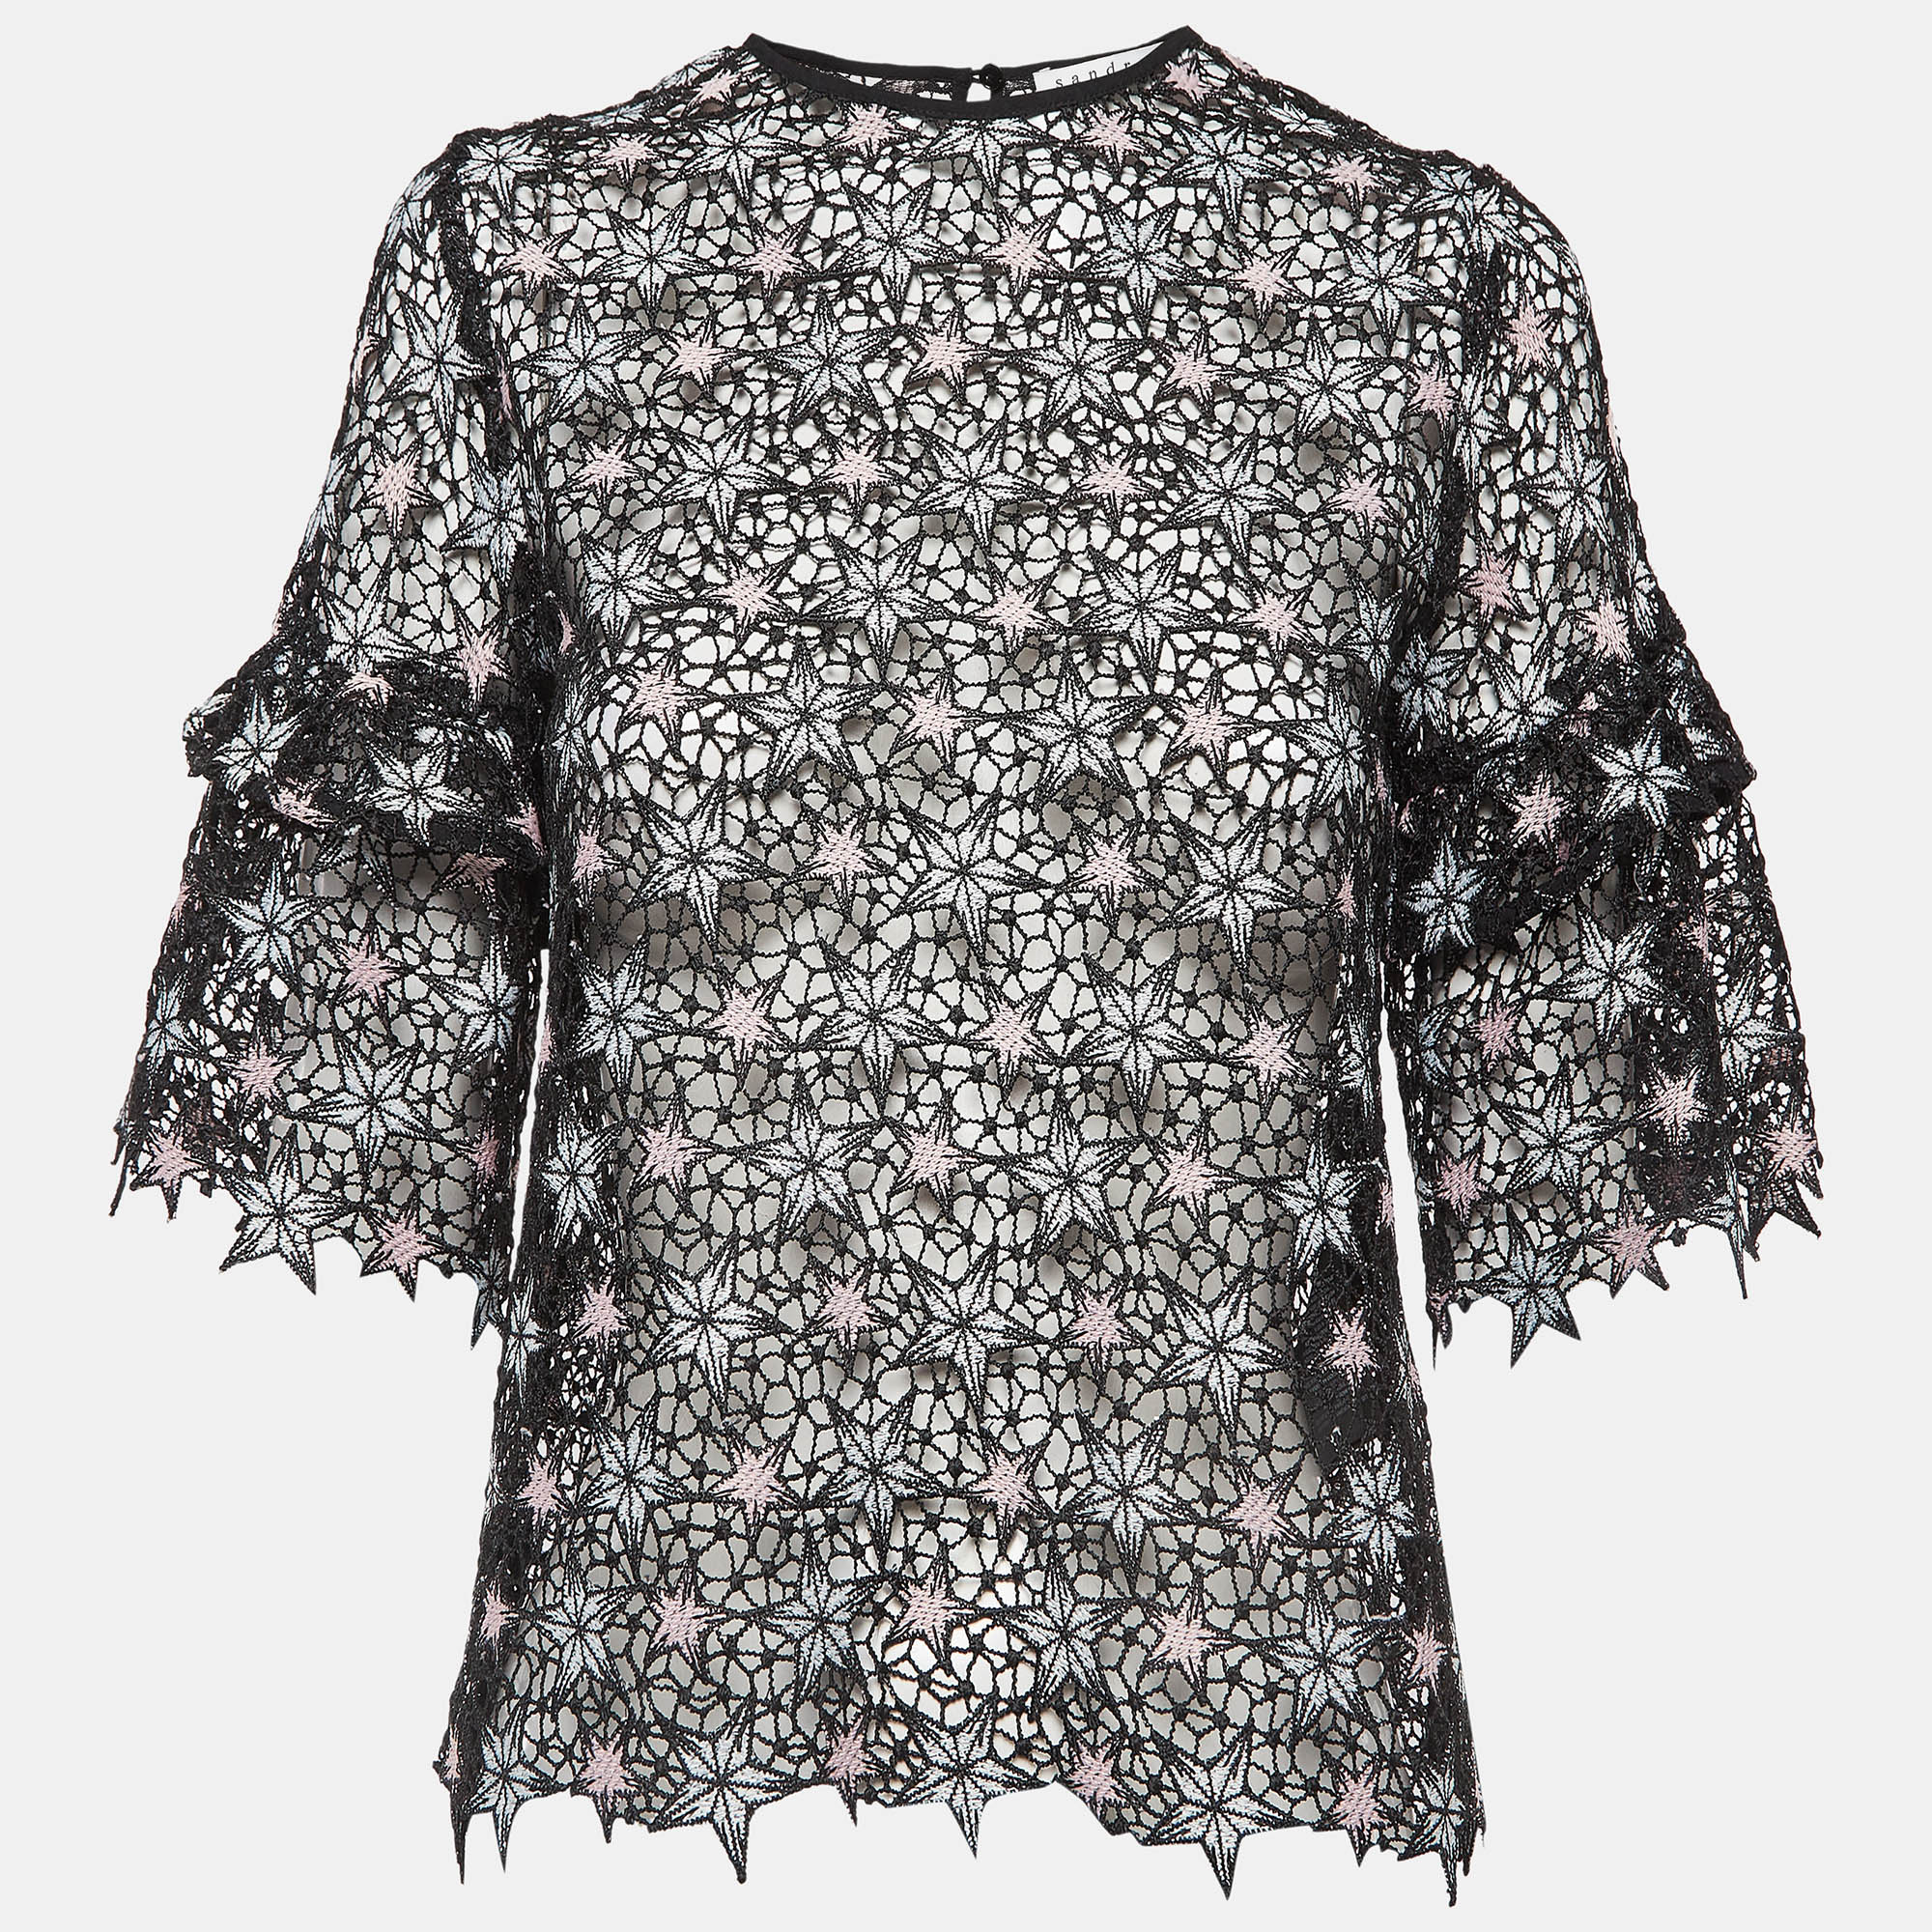 Sandro black star pattern lace flared sleeve top s